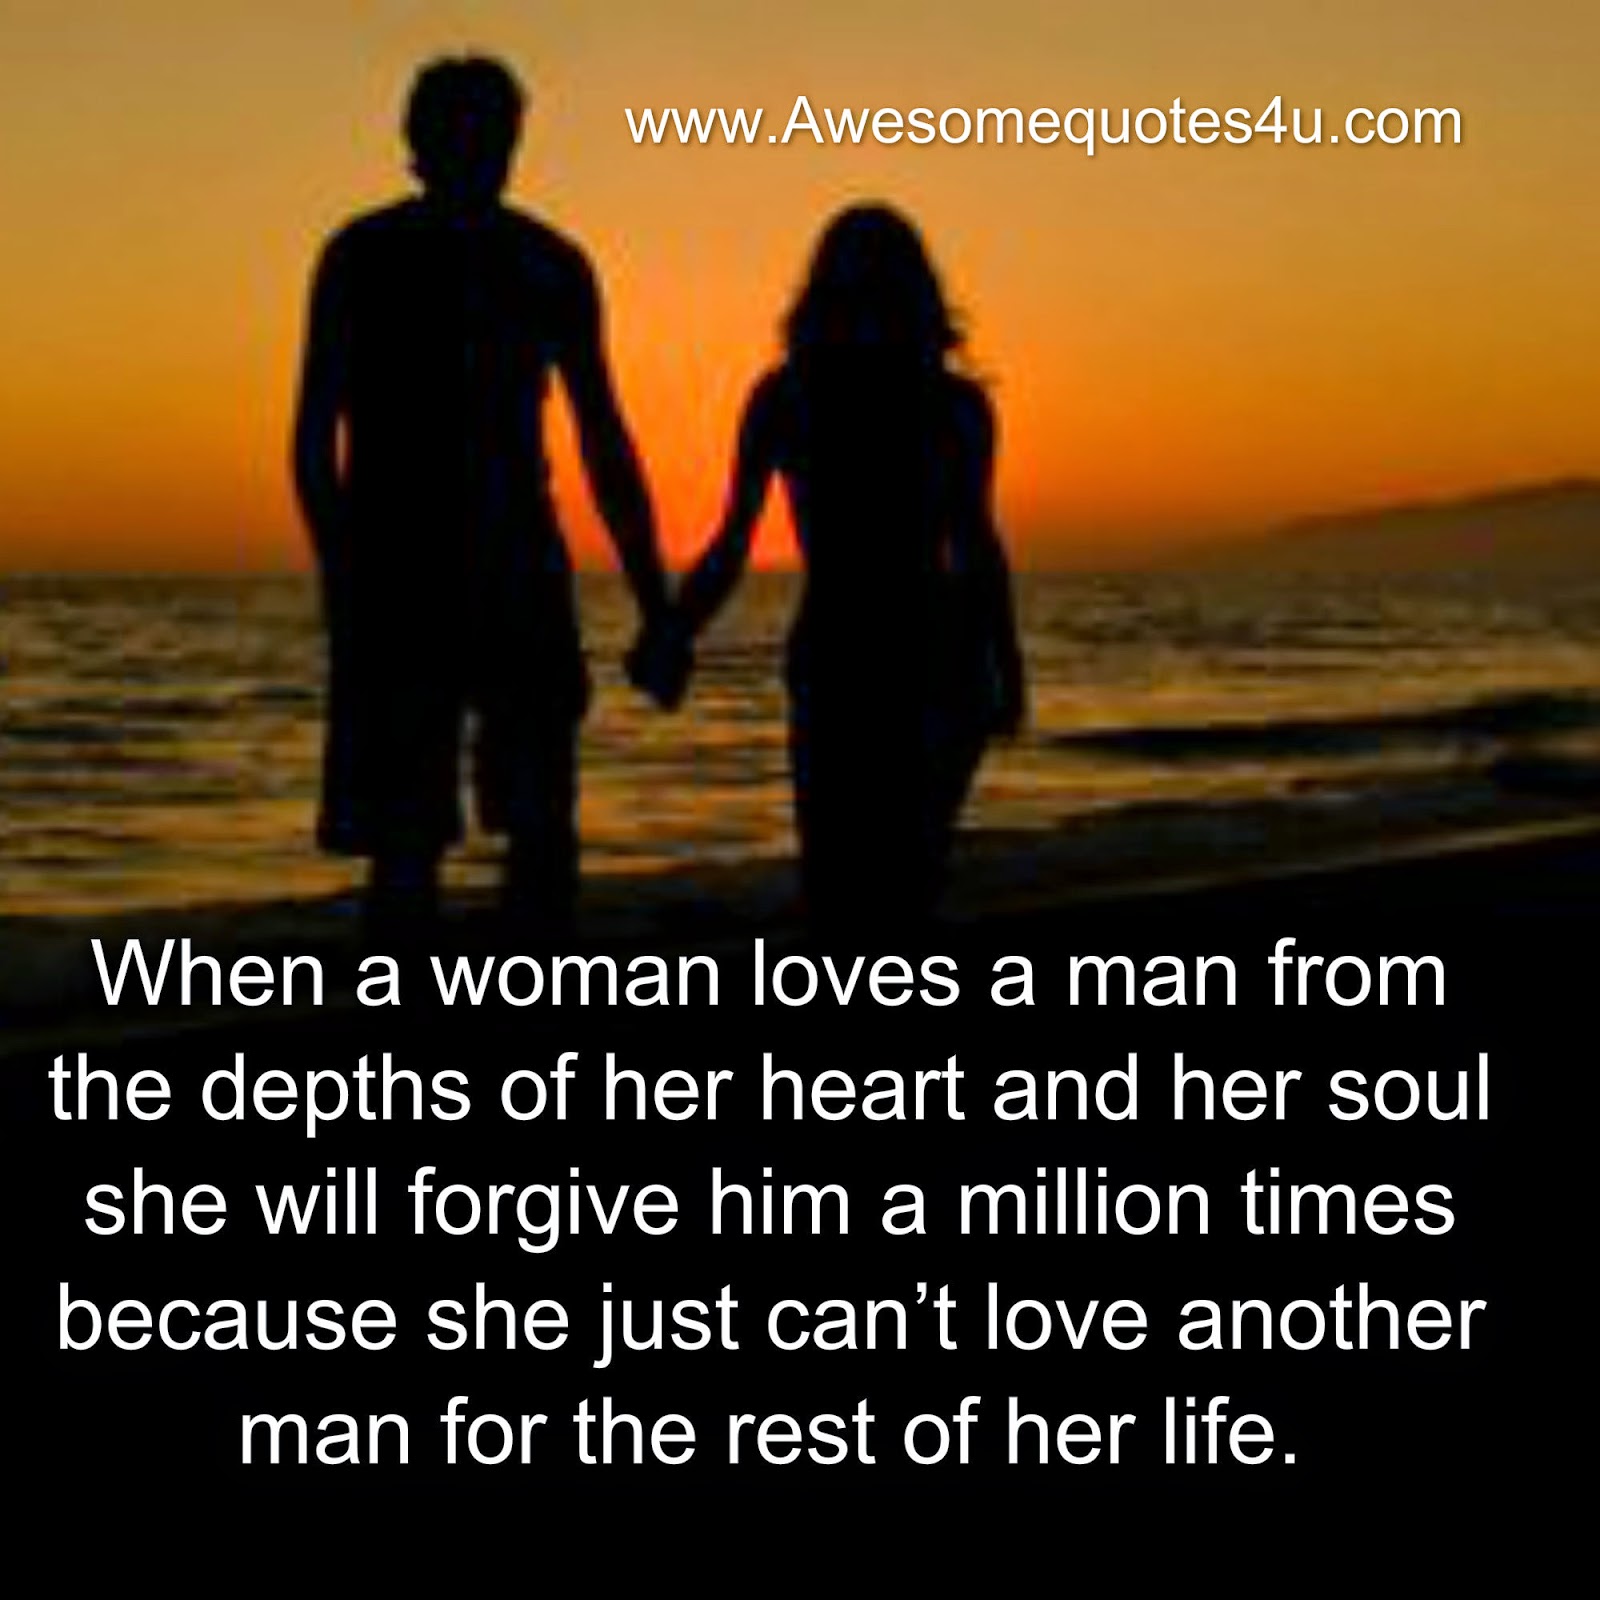 Awesome Quotes: A Woman Can Forgive A Million Times..